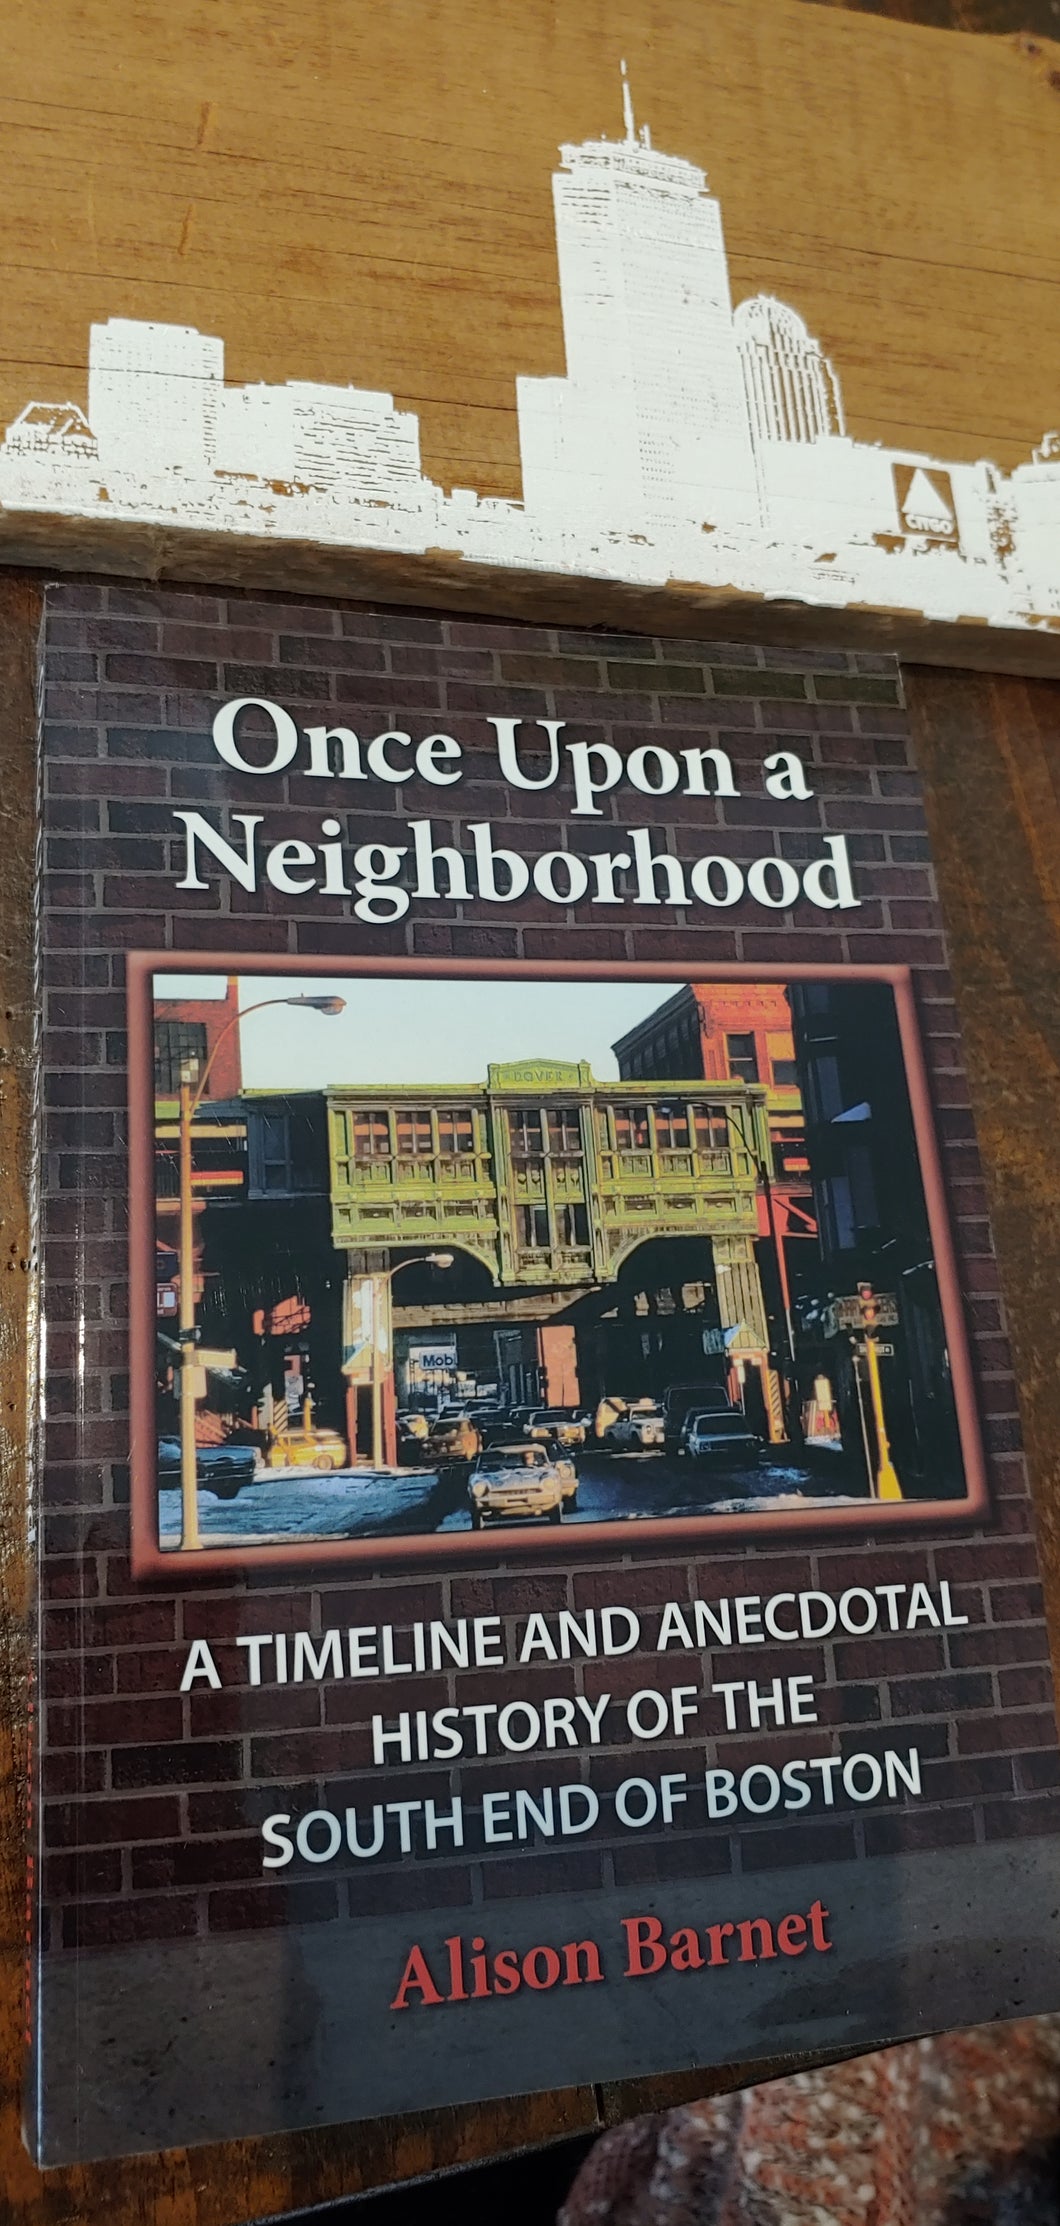 Once Upon a Neighborhood - a History of Boston's South End, by Alison Barnet